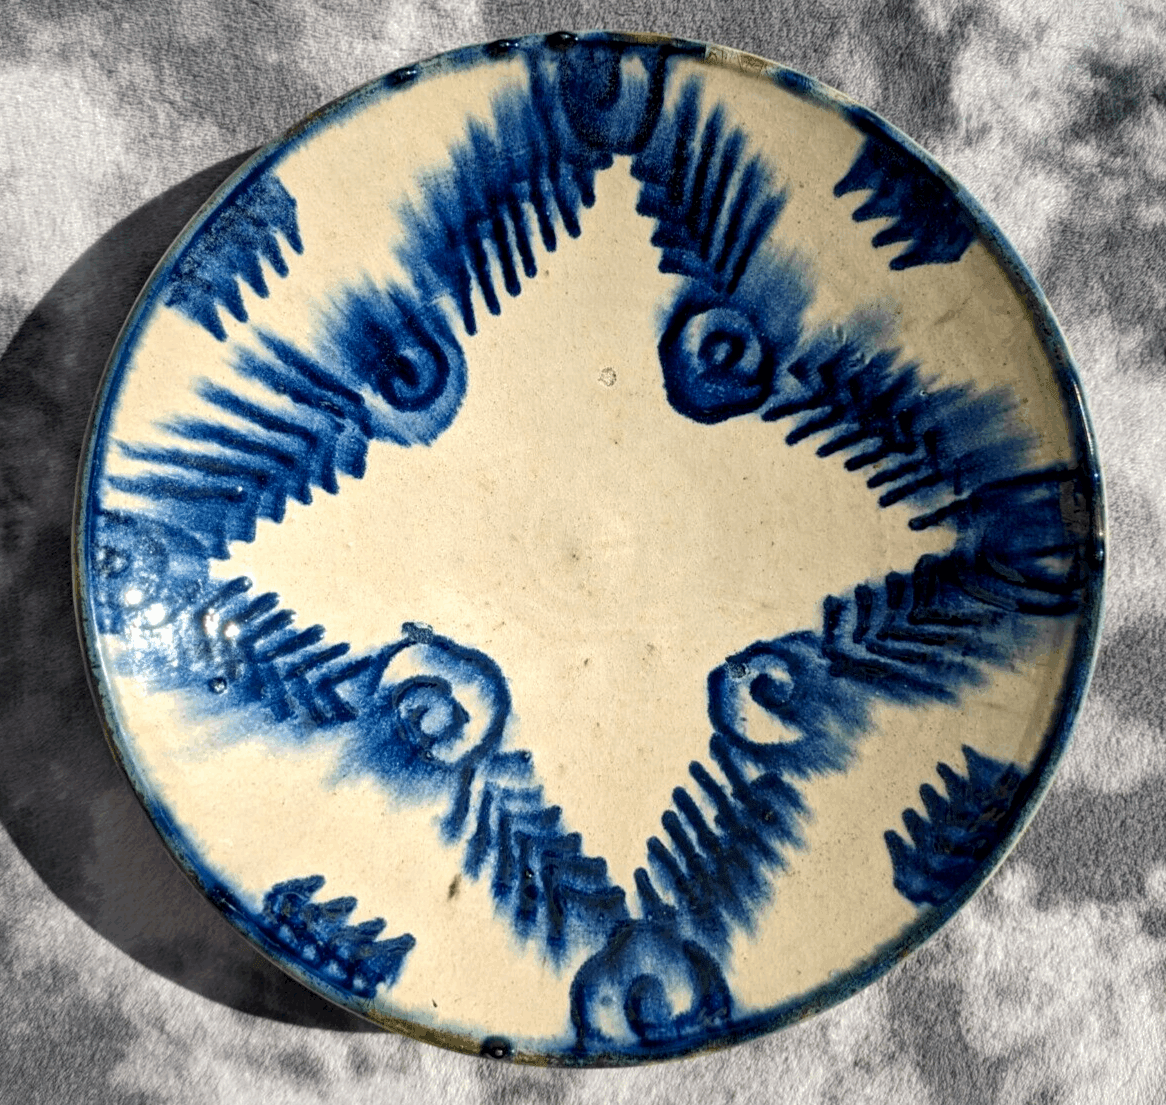 19th / 20th Century Spanish Earthenware Antique Pottery Ceramic Bowl Charger Plate